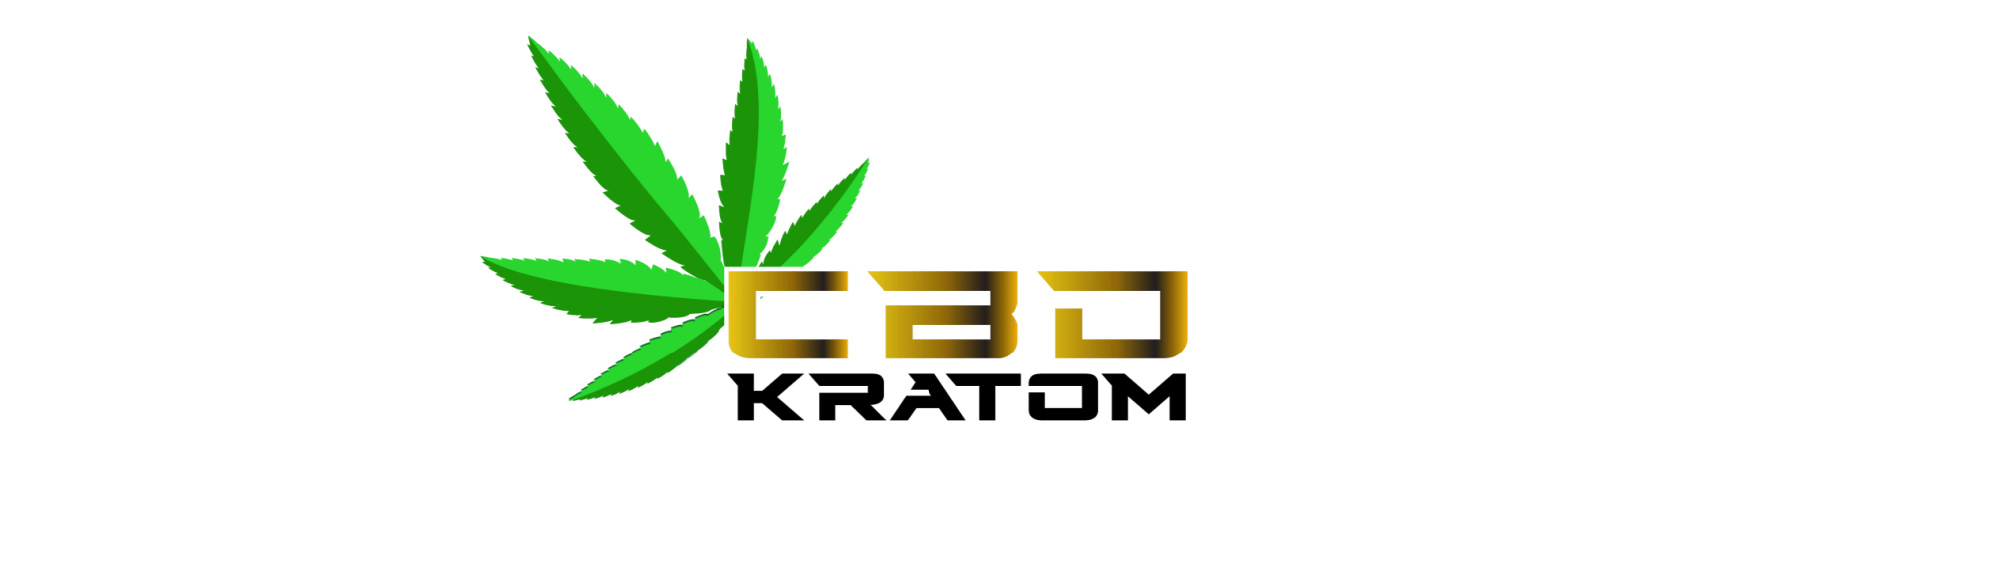 The Best Places to Buy Kratom in St. Louis, Missouri